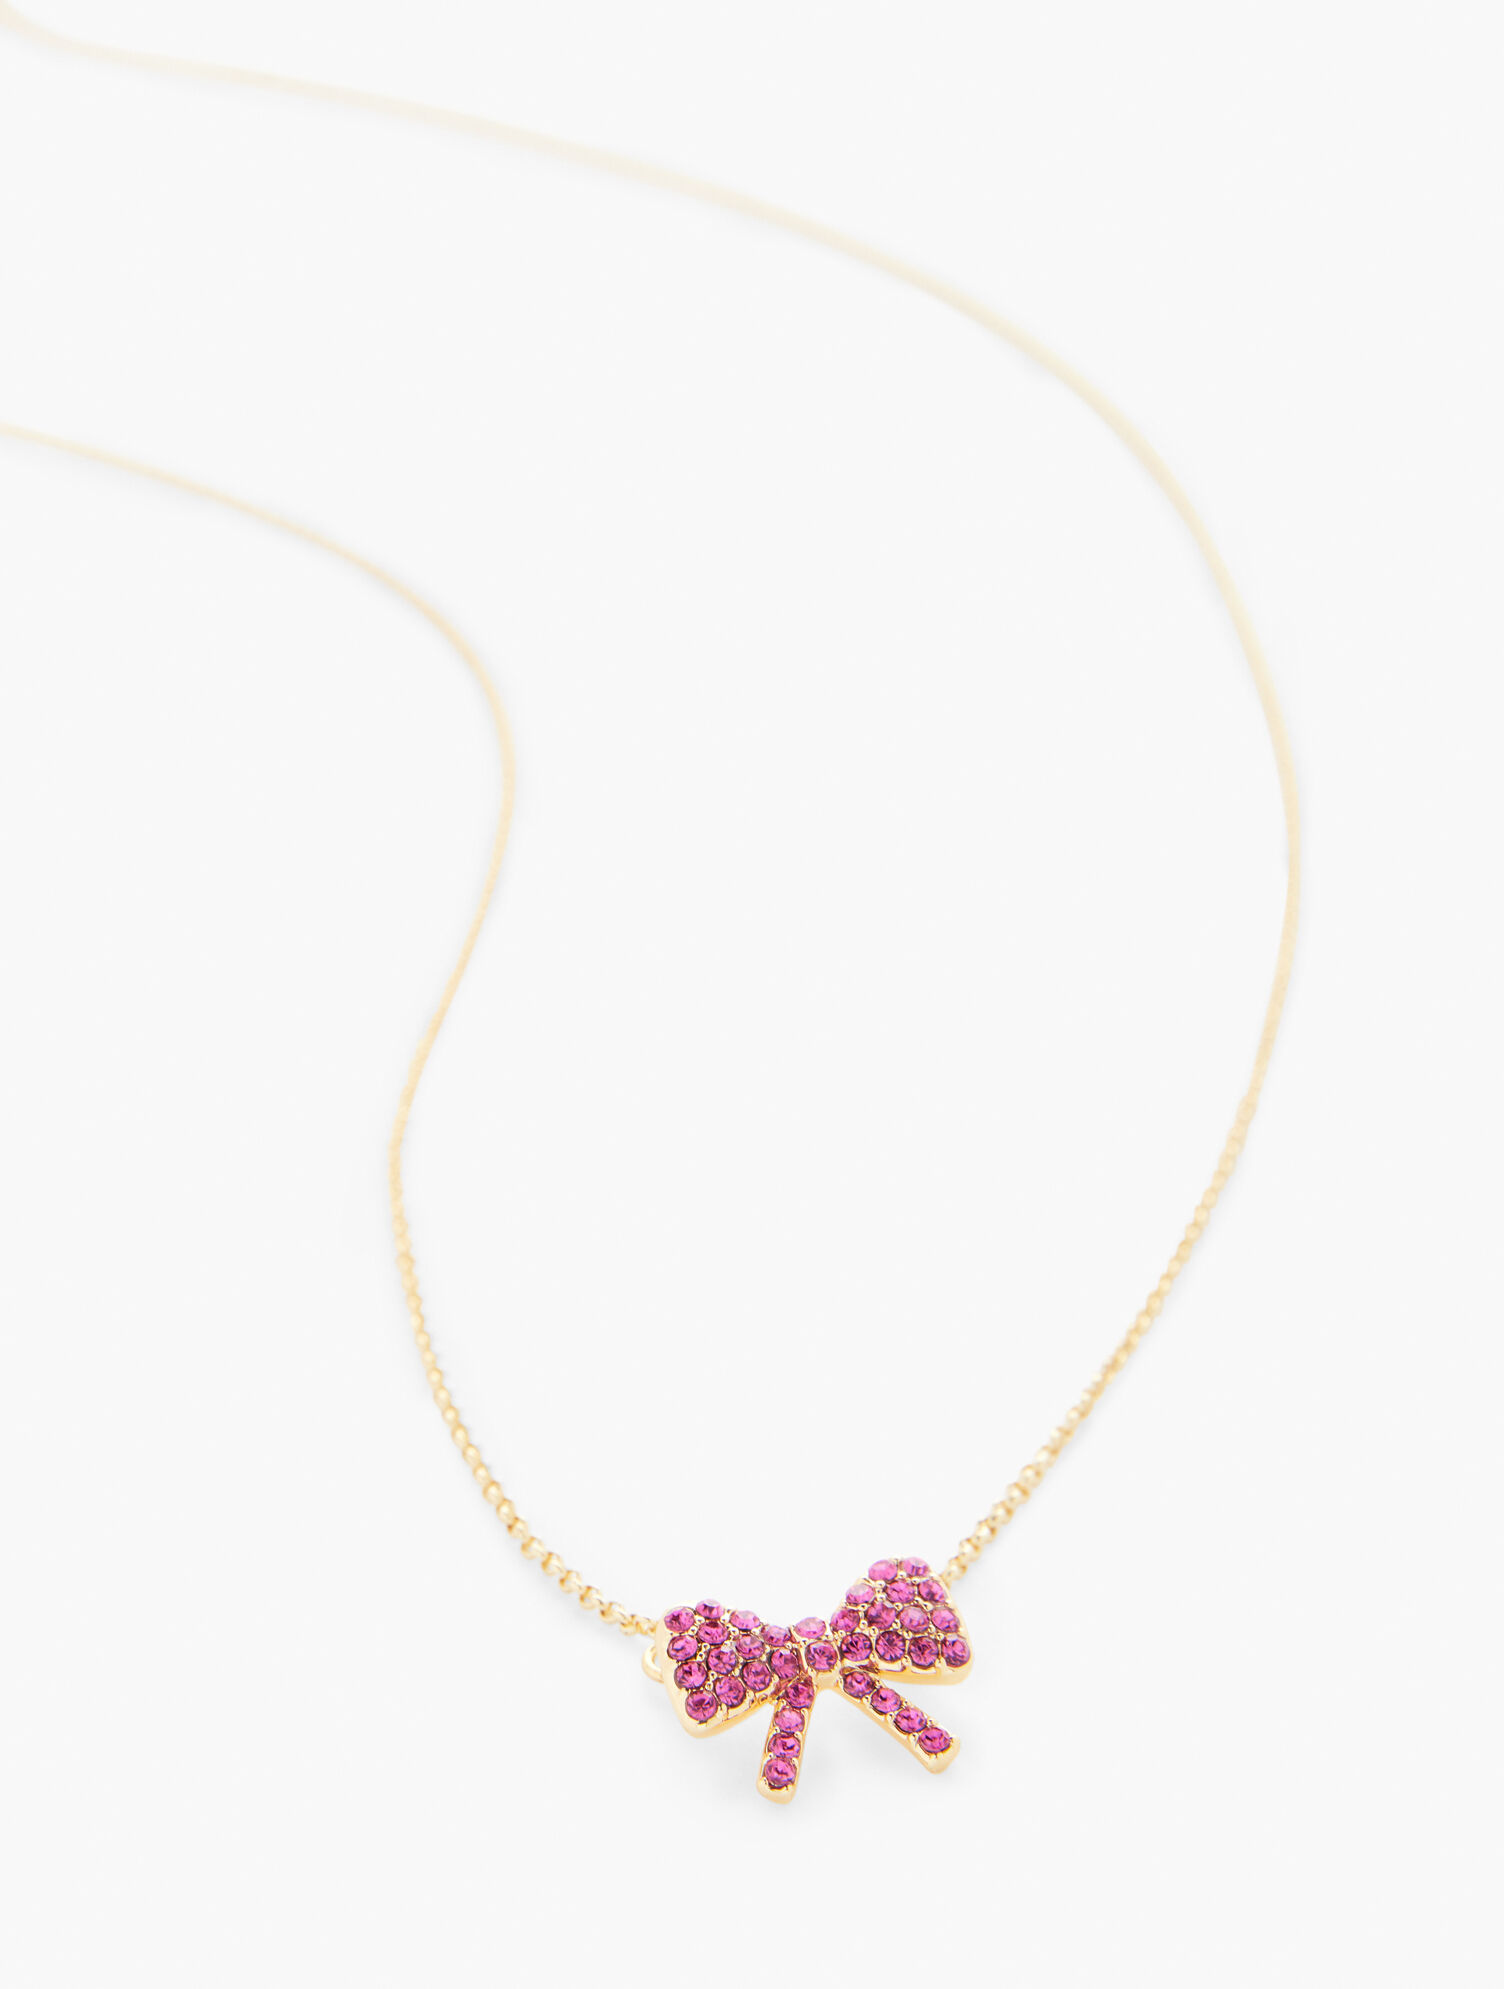 Mignonne Gavigan for Talbots Pink Bow Necklace - Fuchsia Pink/Gold - 001